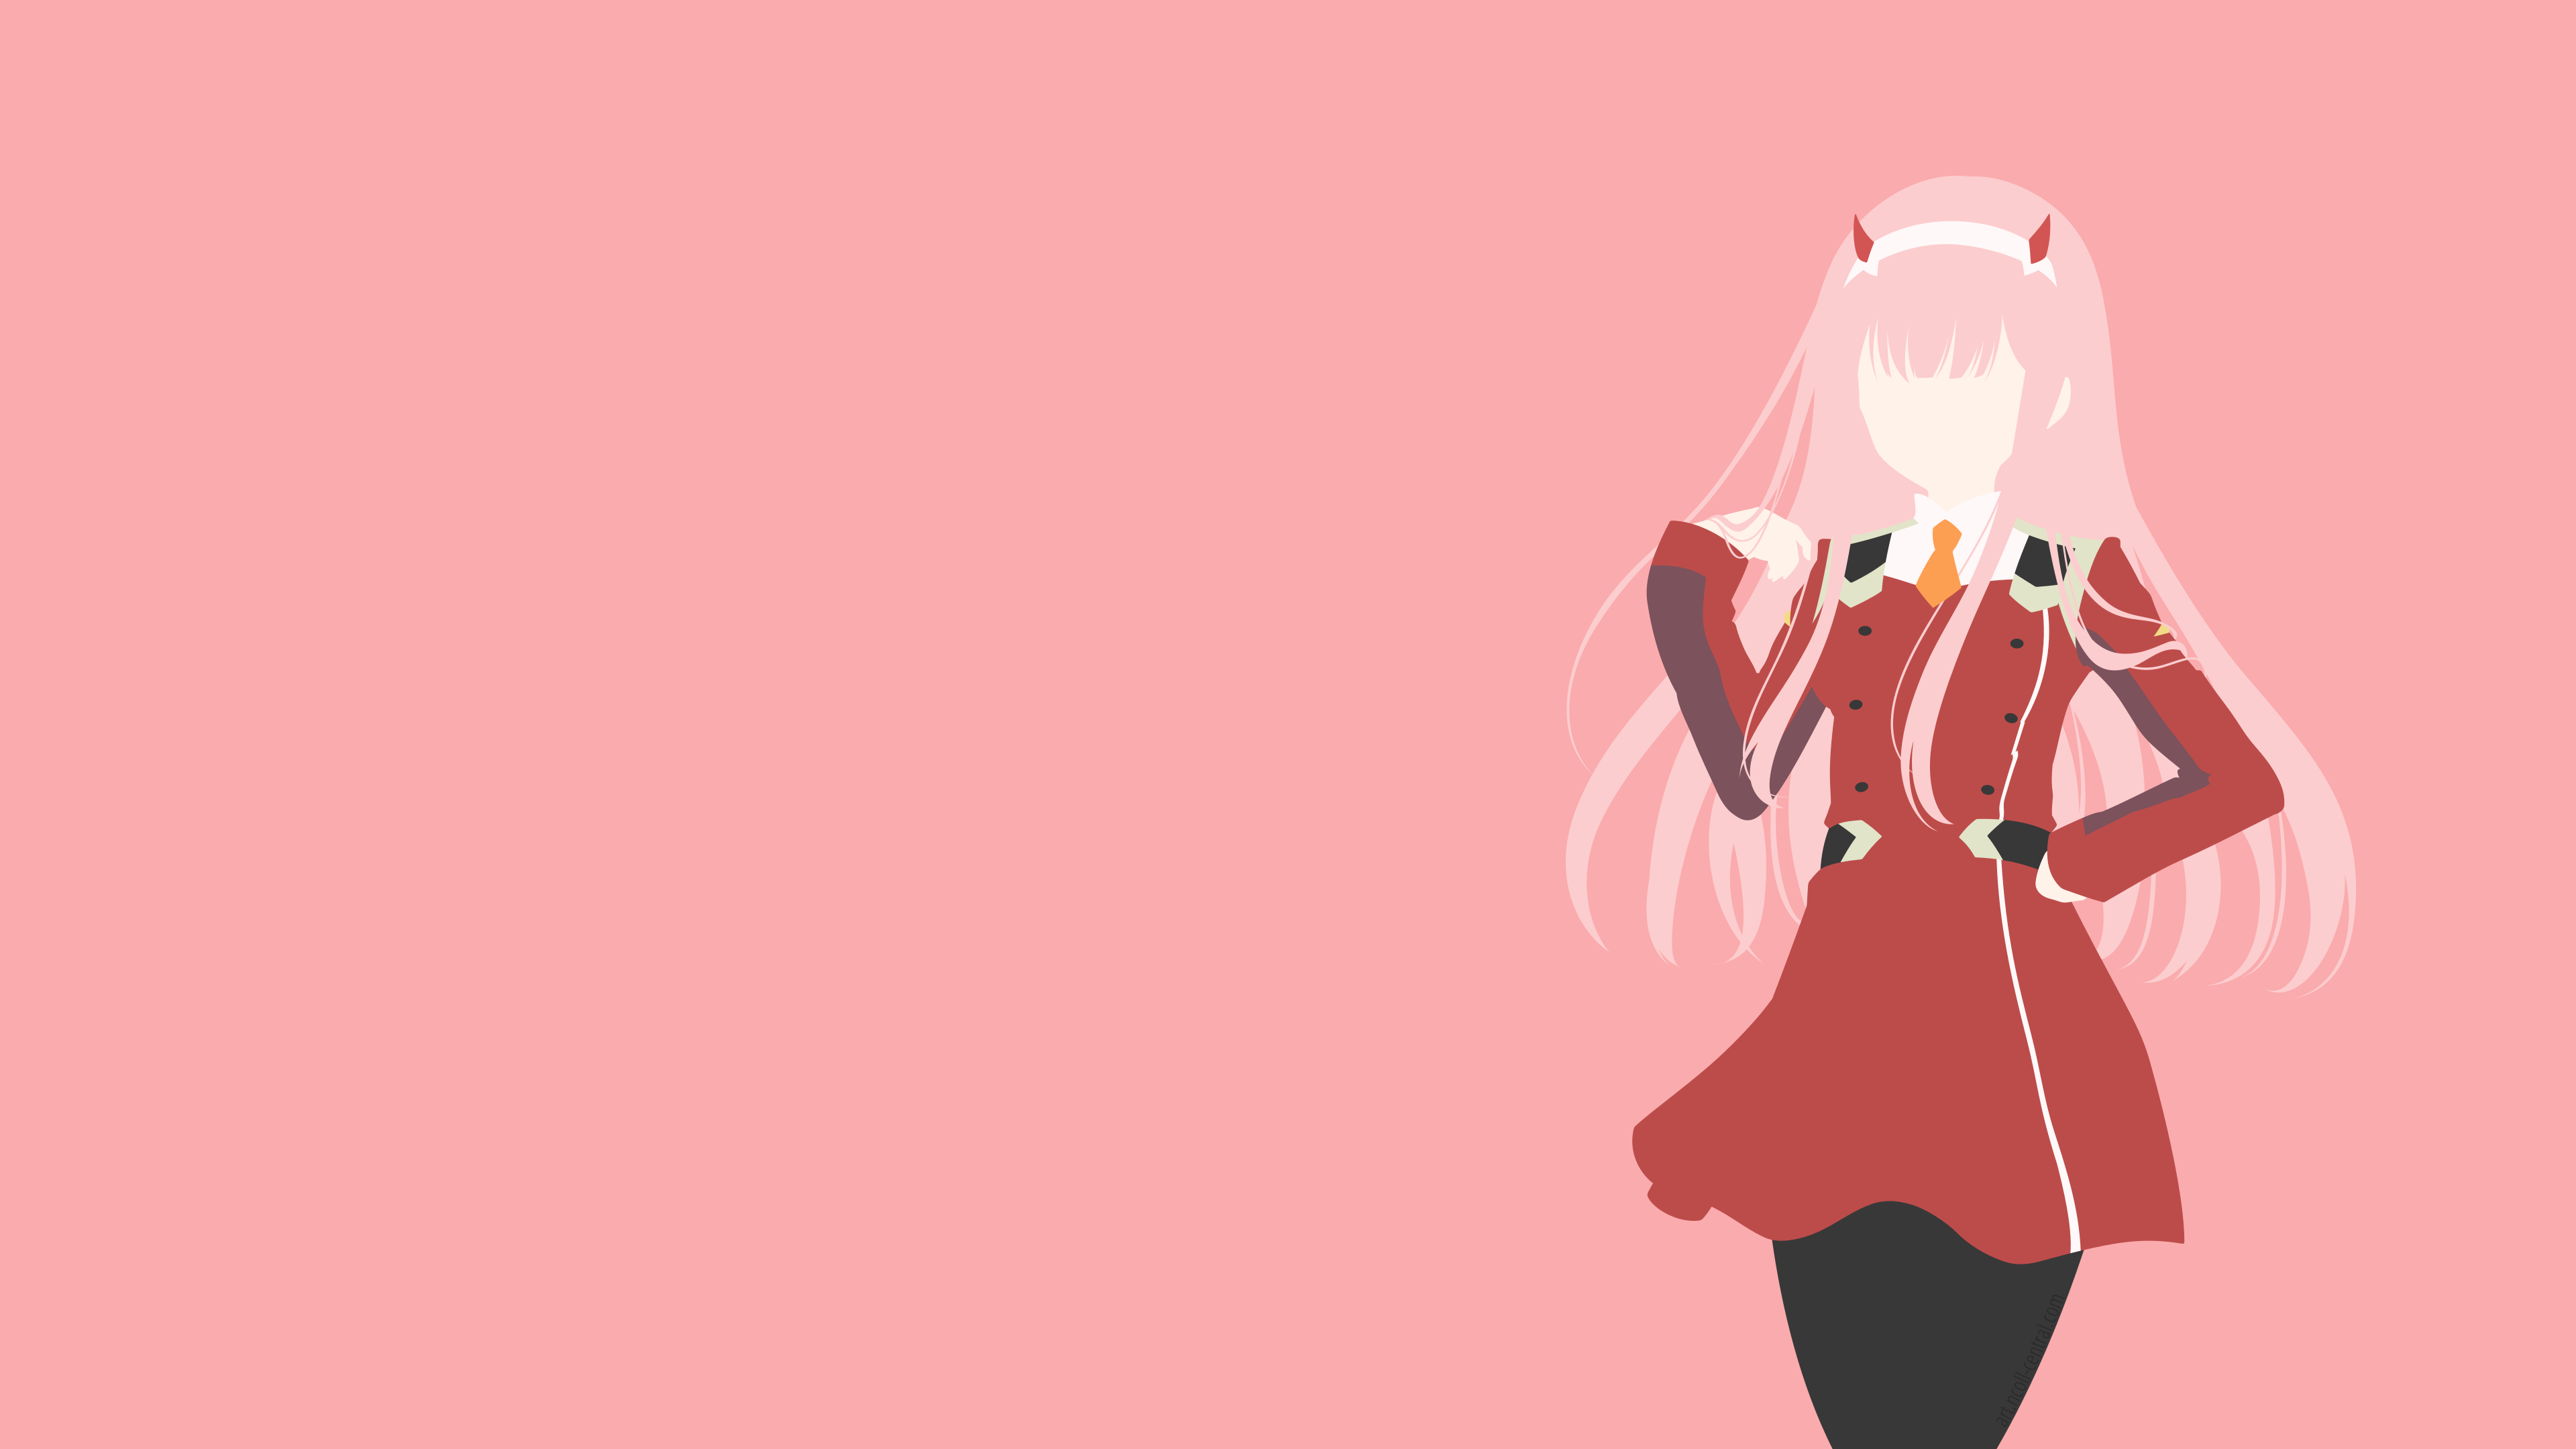 Anime 3840x2160 Darling in the FranXX Zero Two (Darling in the FranXX) anime girls pink hair